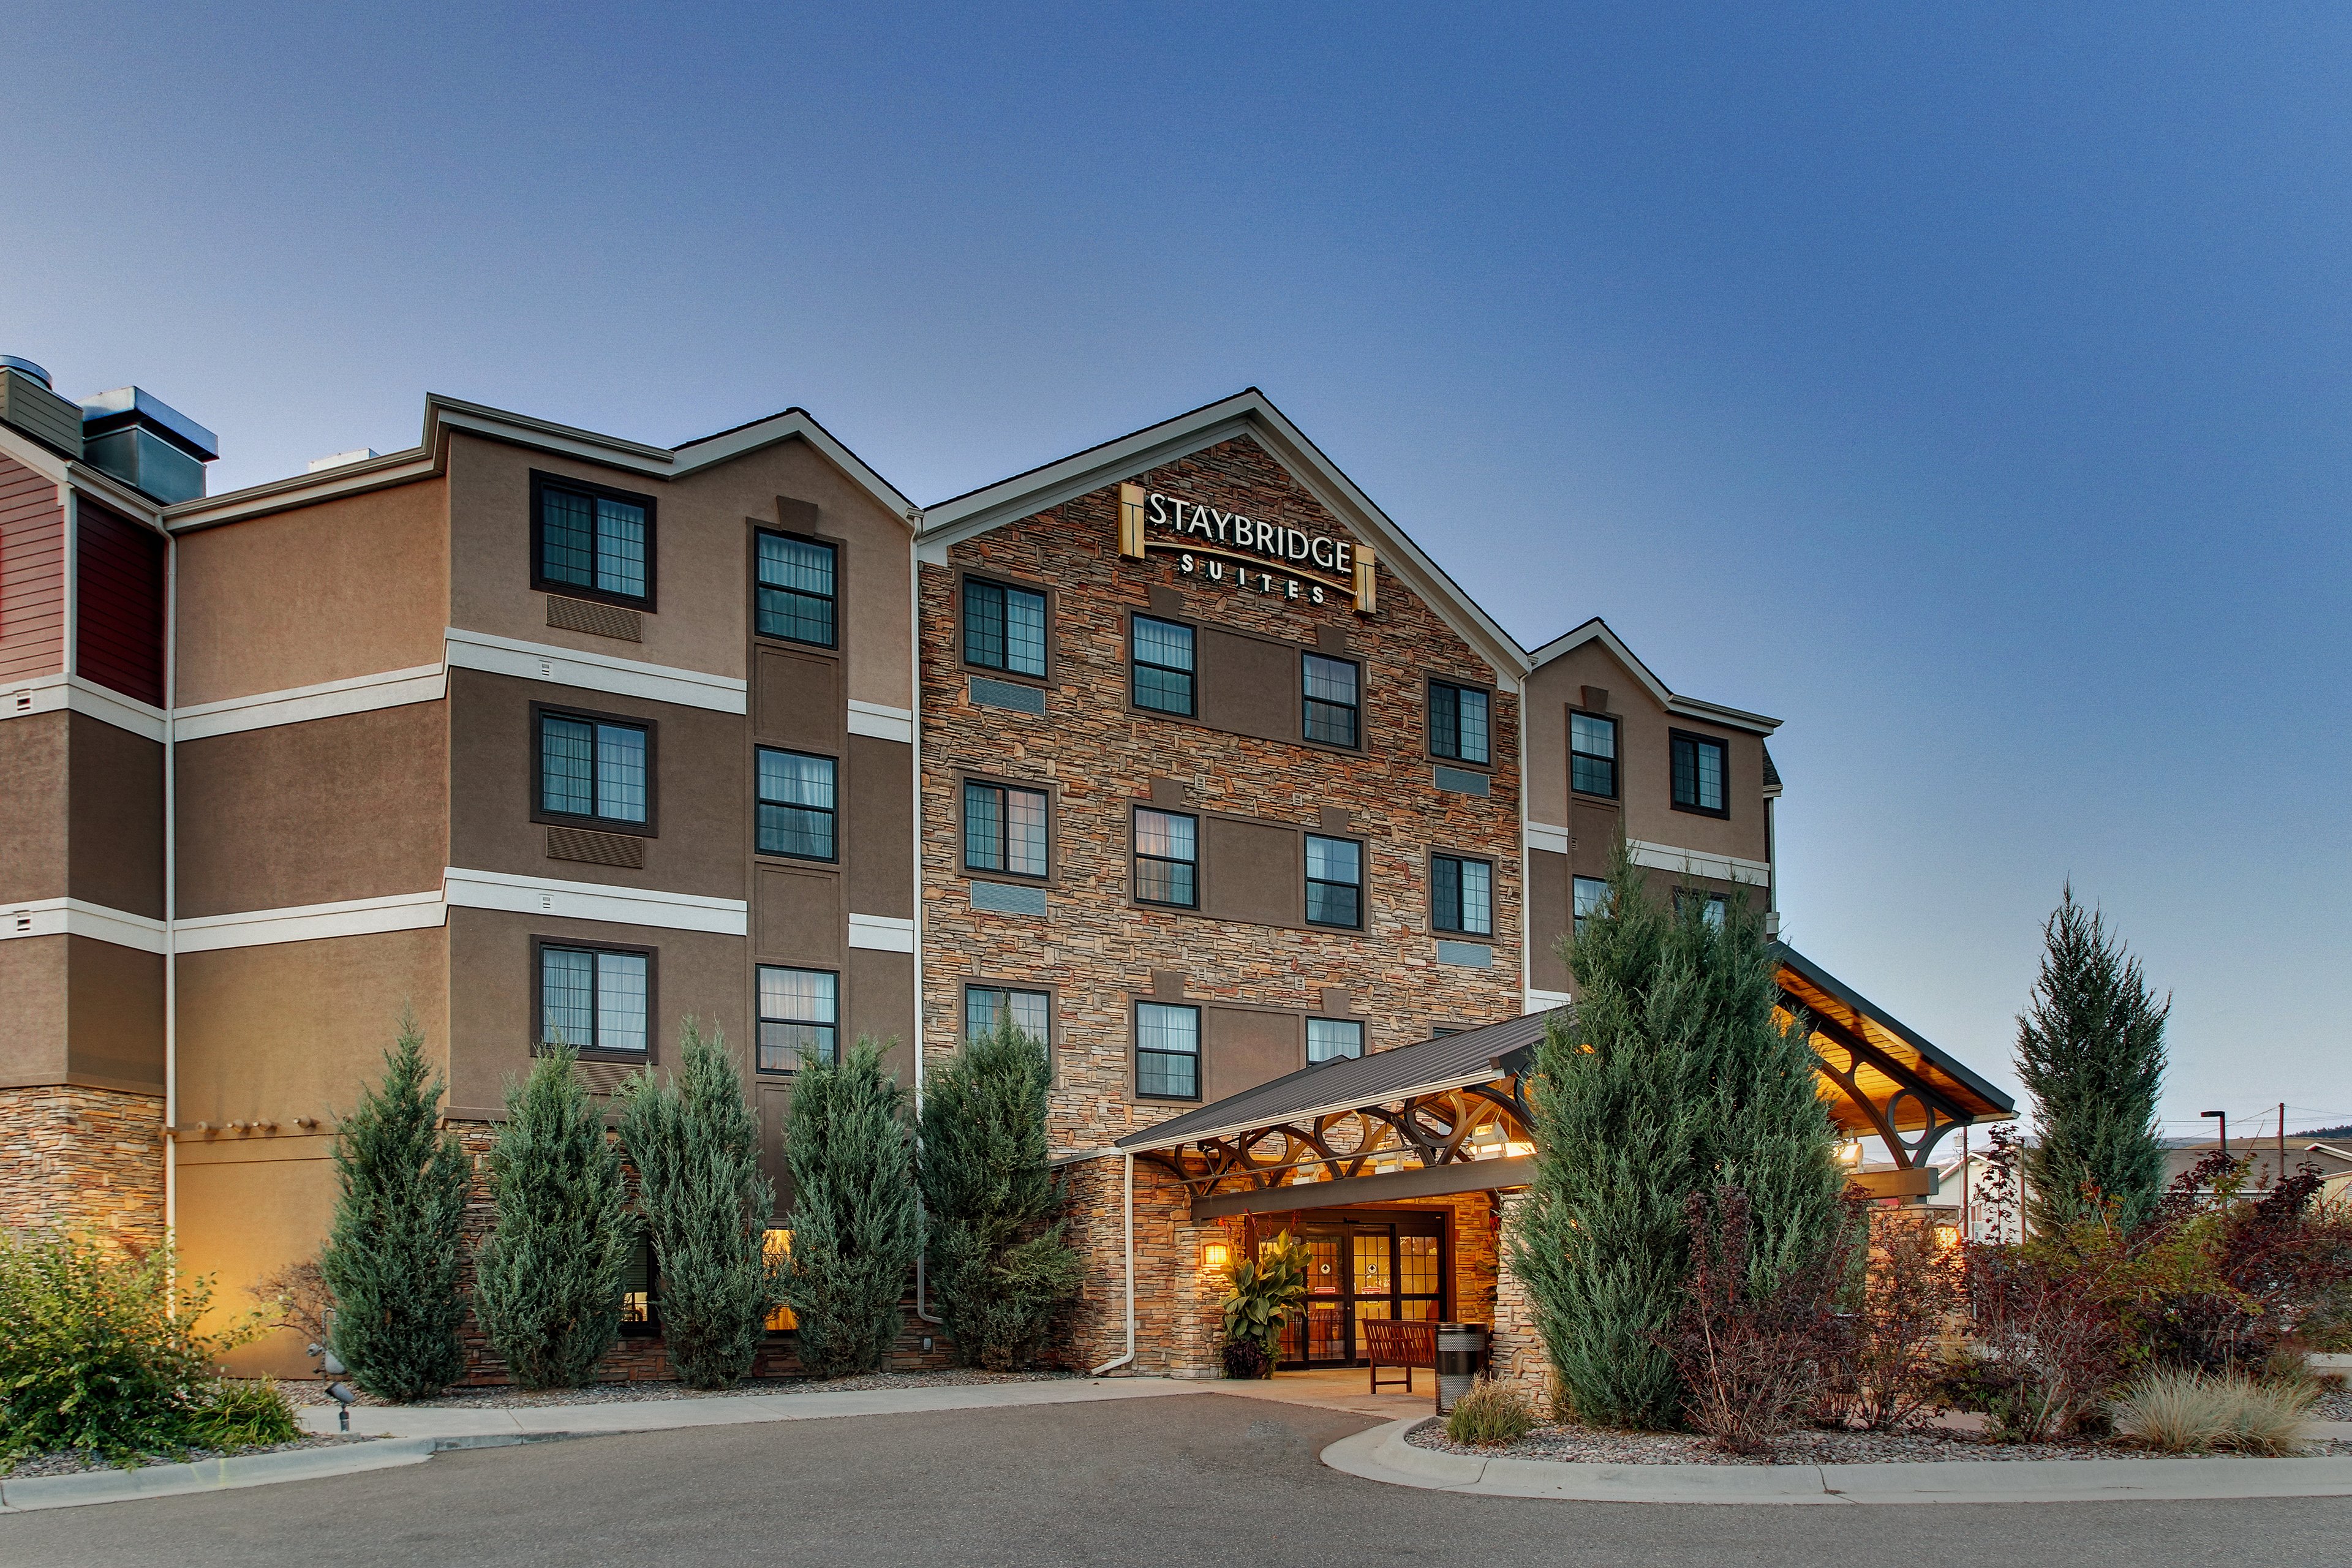 Welcome to the Staybridge Suites Missoula